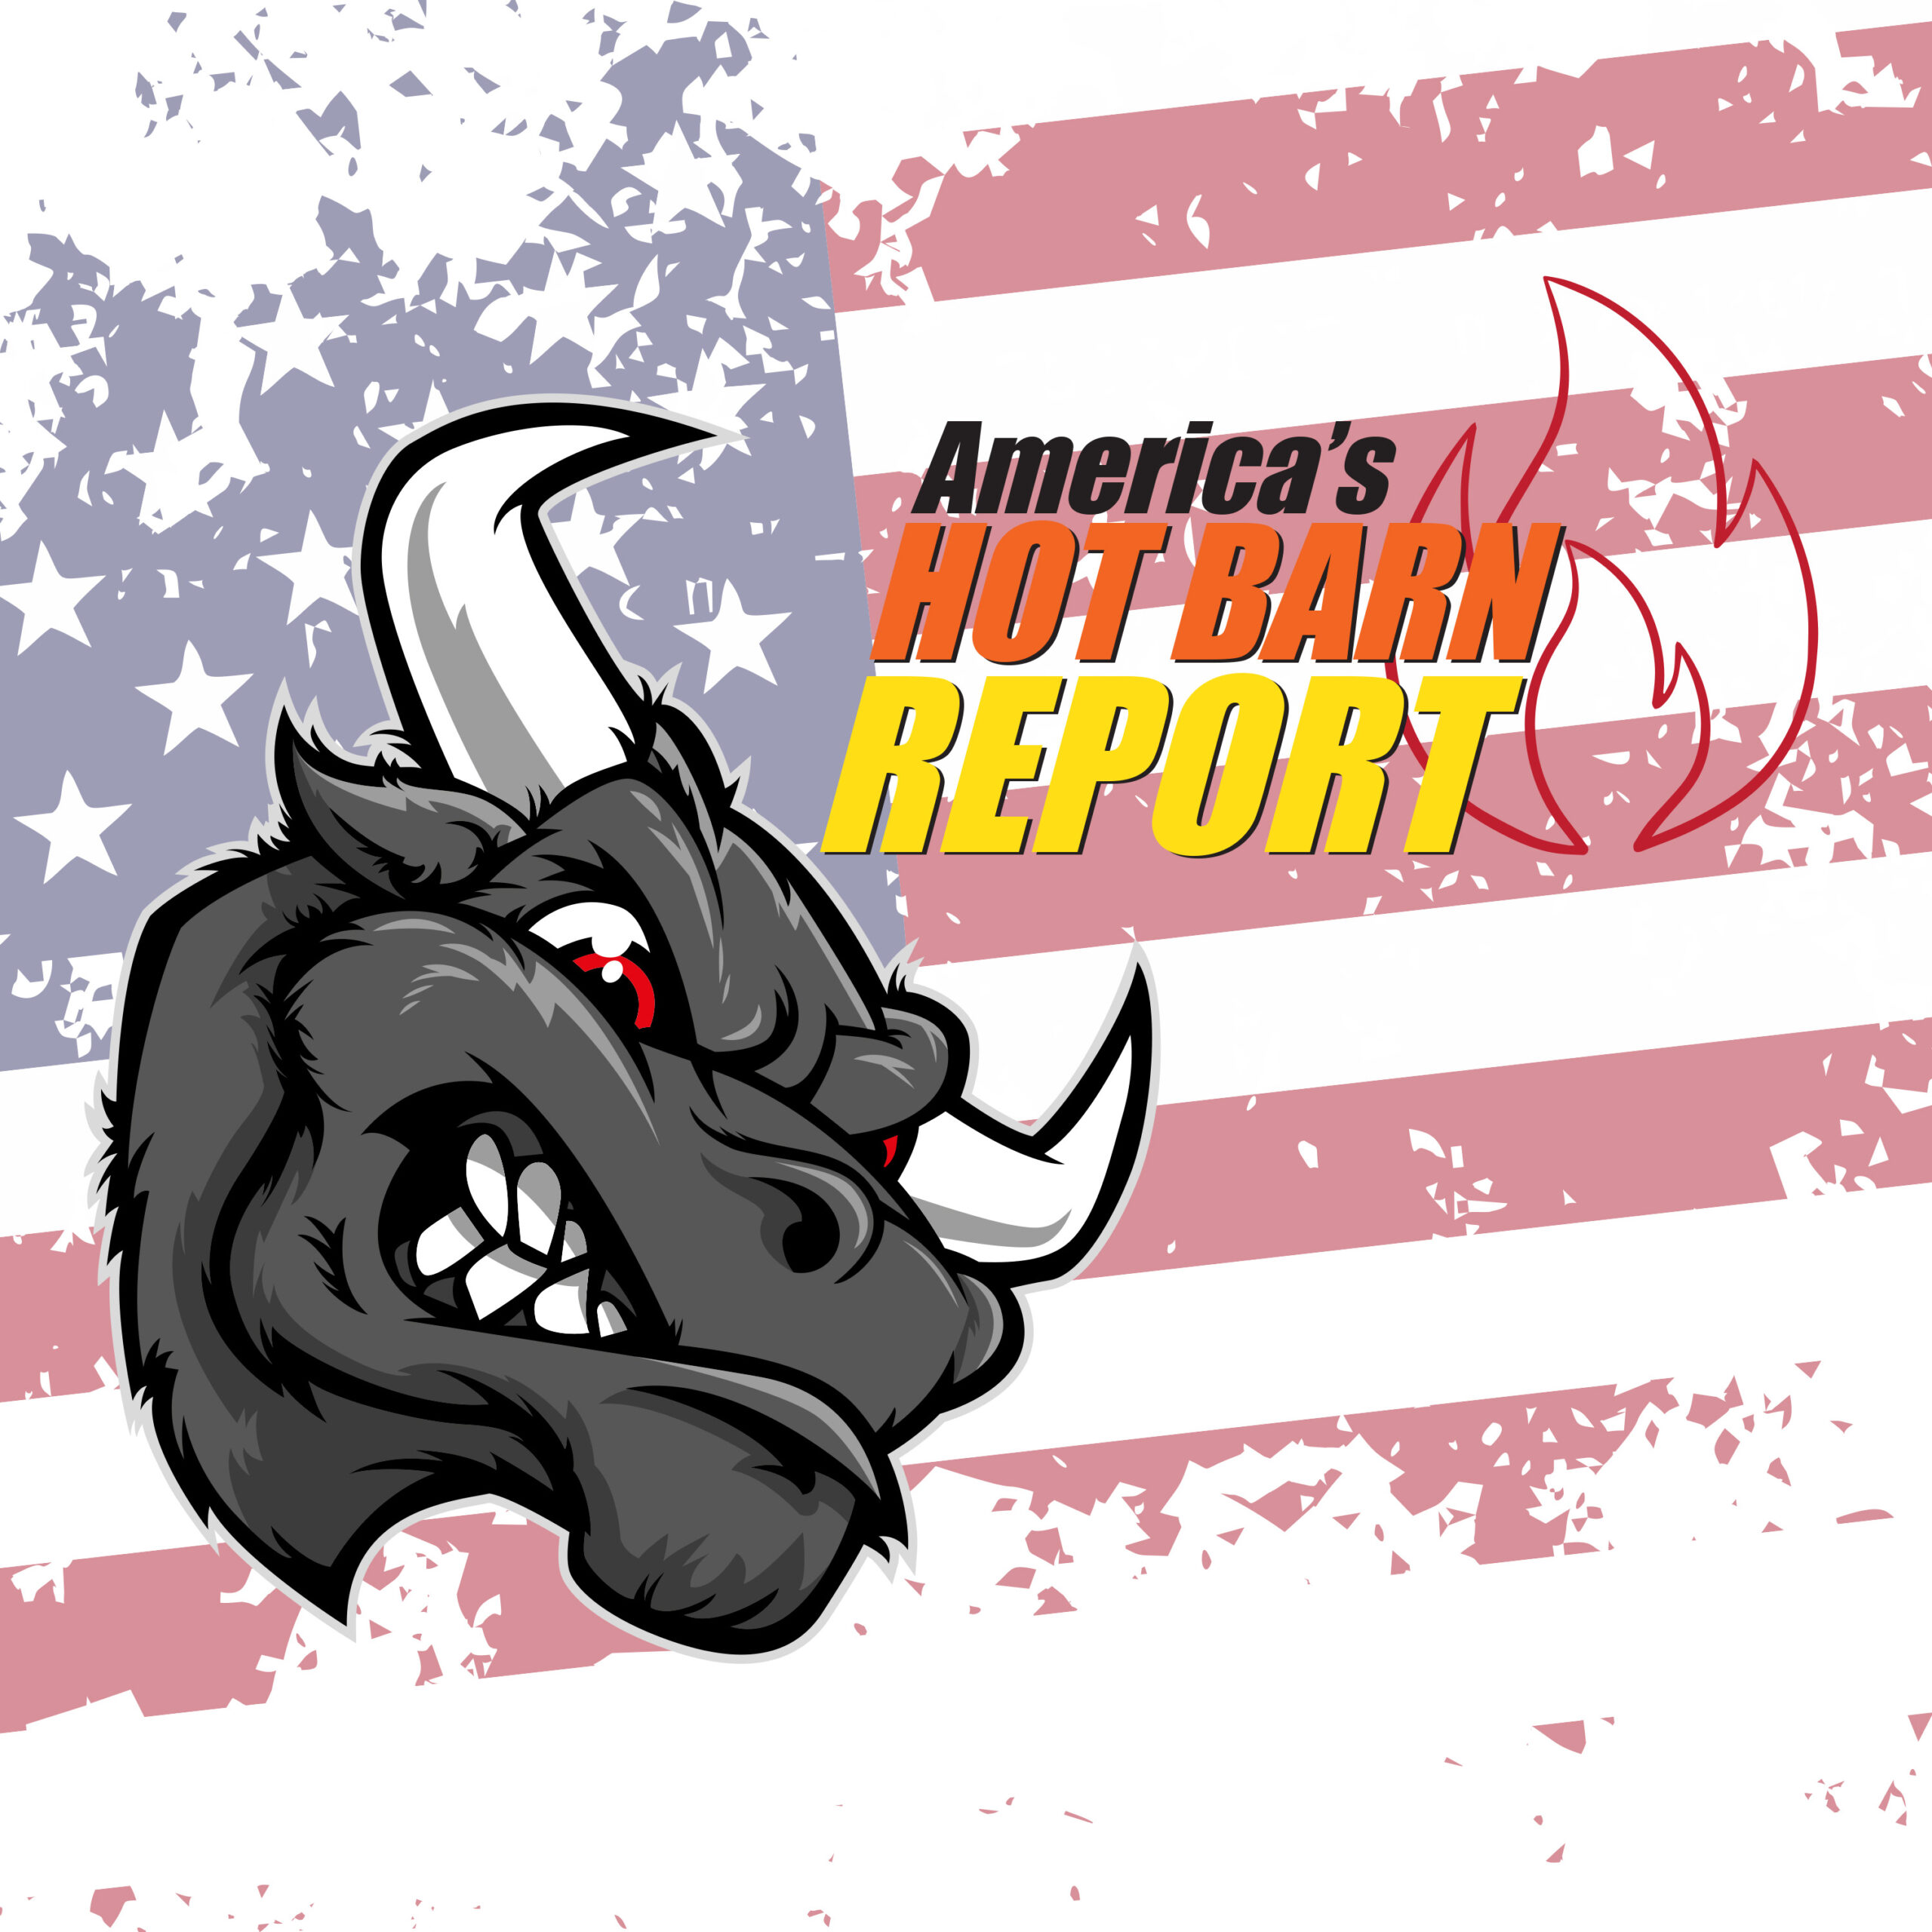 HOT BARN REPORT: Special Interview with Mitch Barthel Owner of Tri-County Stockyards! cover art